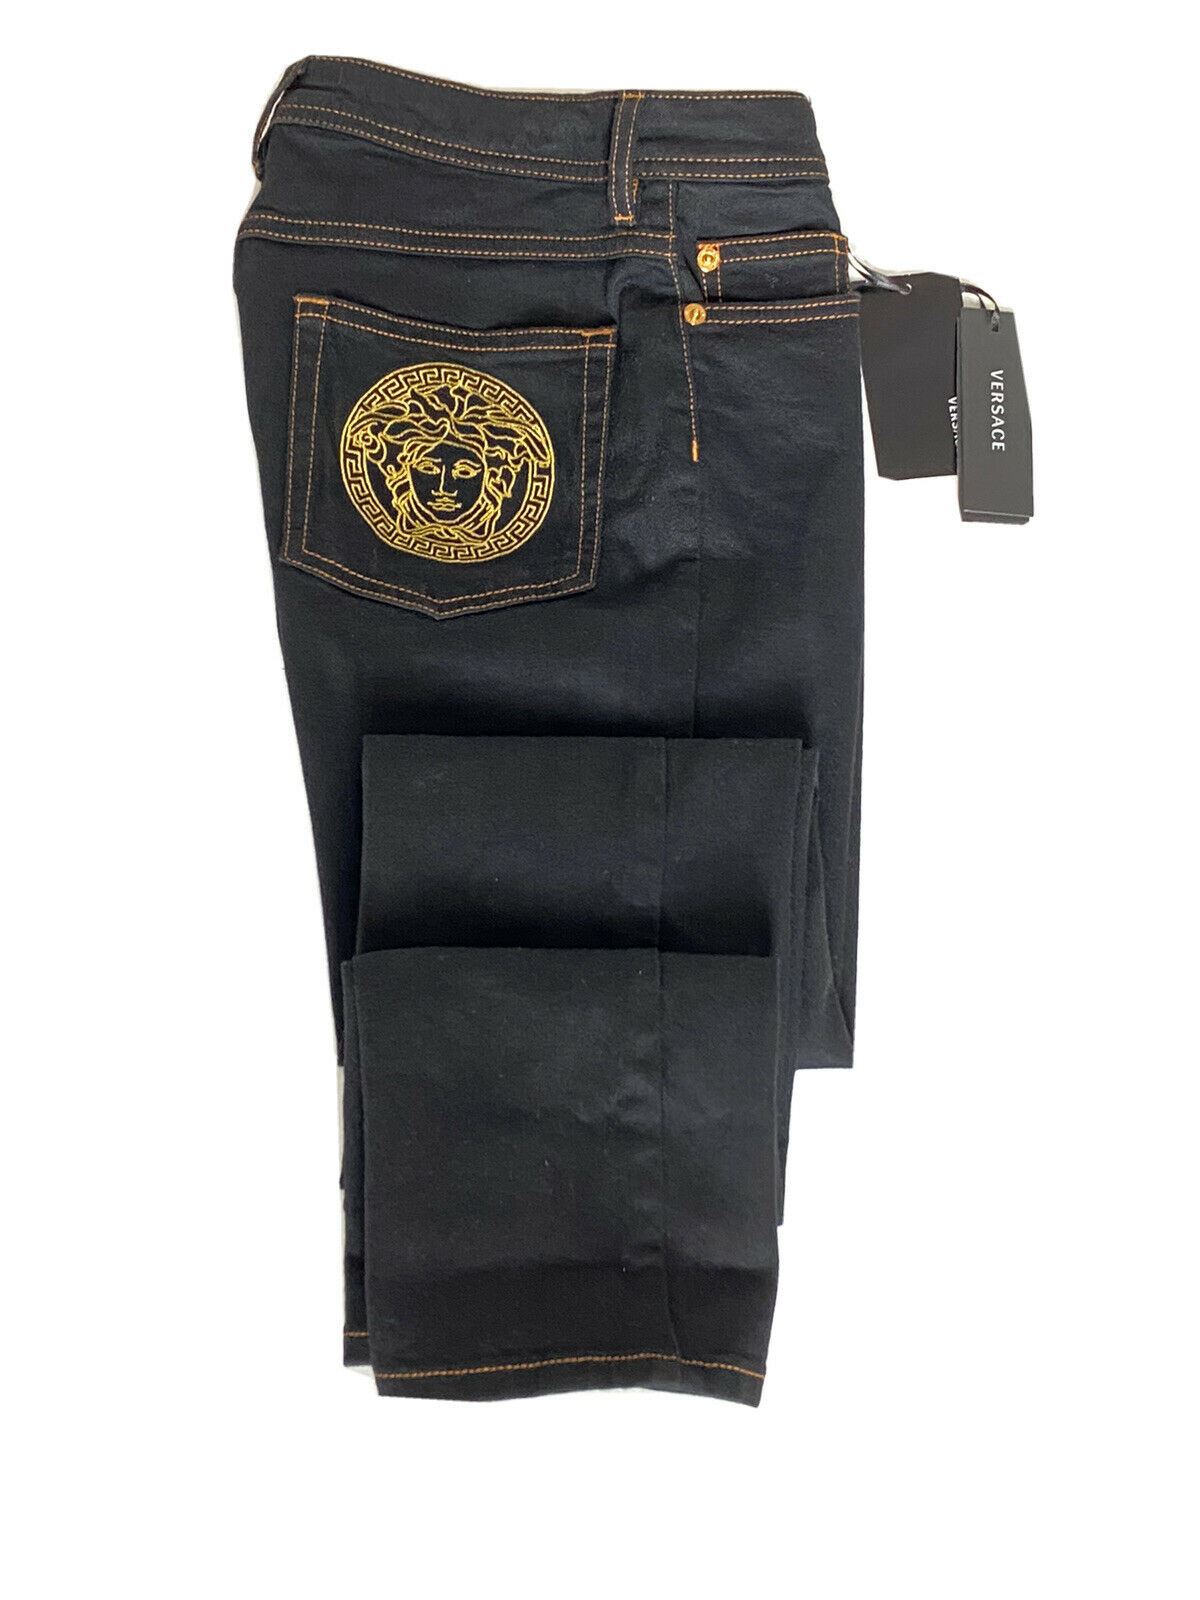 NWT $500 Versace Women's Denim Black Jeans Size 25 US A89556S Made in Italy